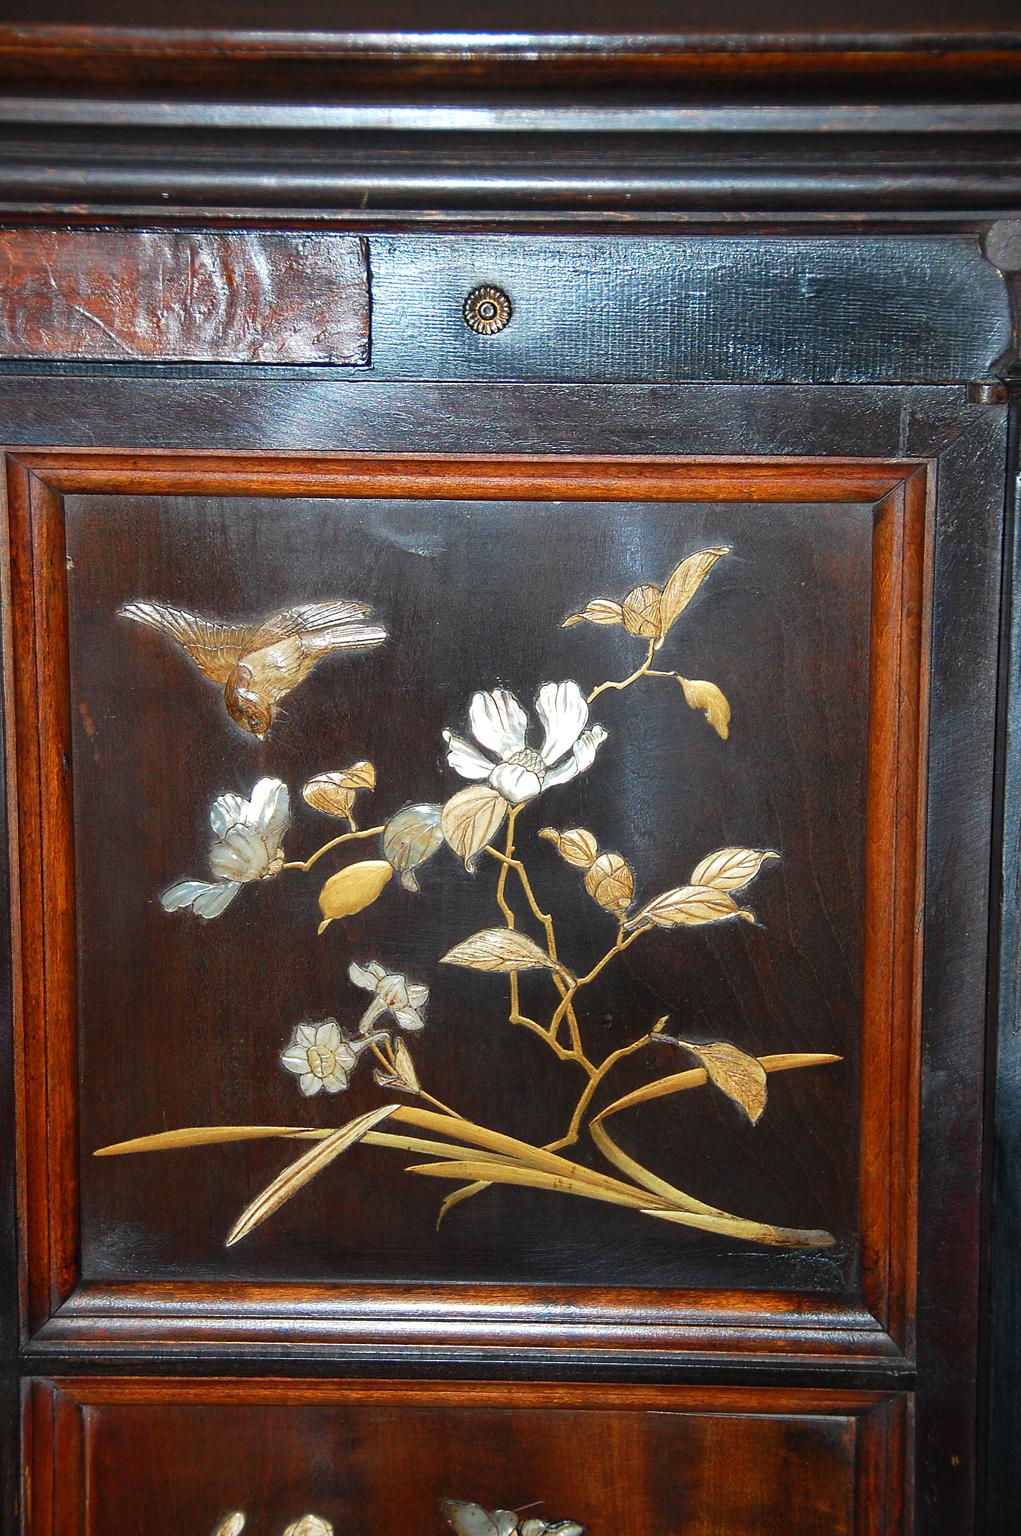 French Art Nouveau ebonized two door cabinet with double arched facade, lower shelf with mirrored back. Two cabinet doors with four inlaid and overlaid naturalistic panels of birds, butterflies and flowers in mother of pearl and bone. The carcass of